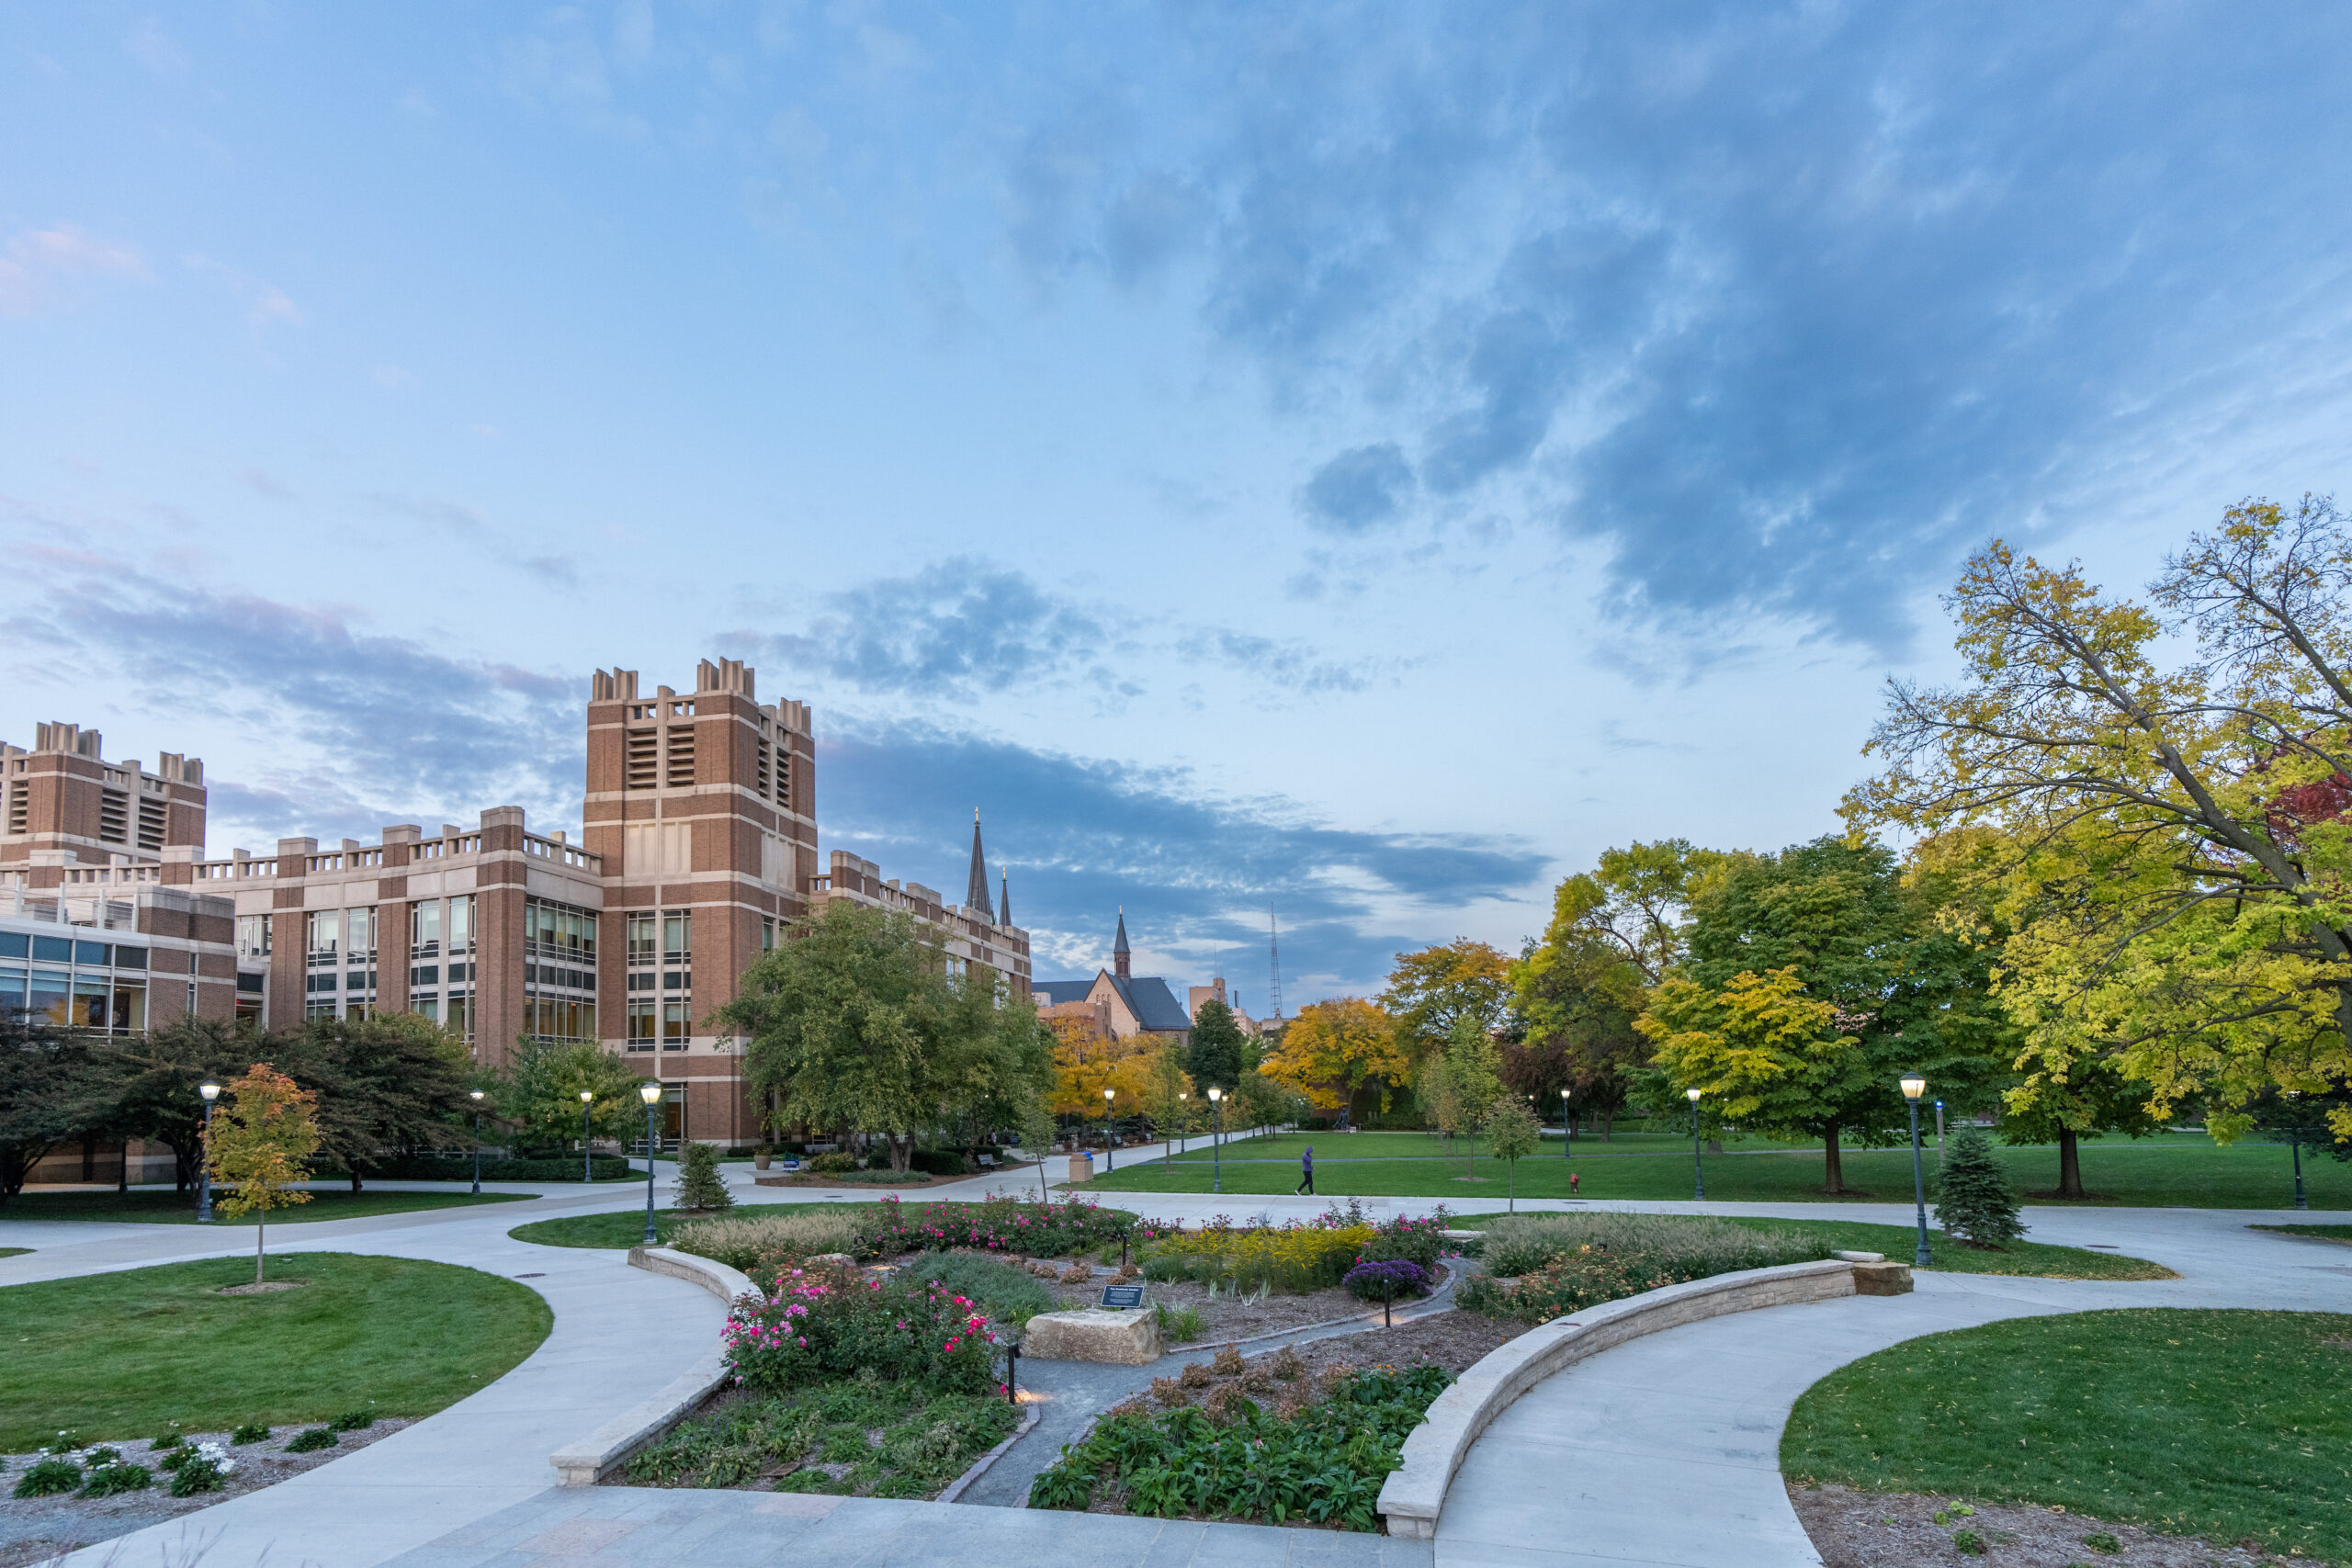 A grant is boosting civic reasoning and discourse at Marquette University